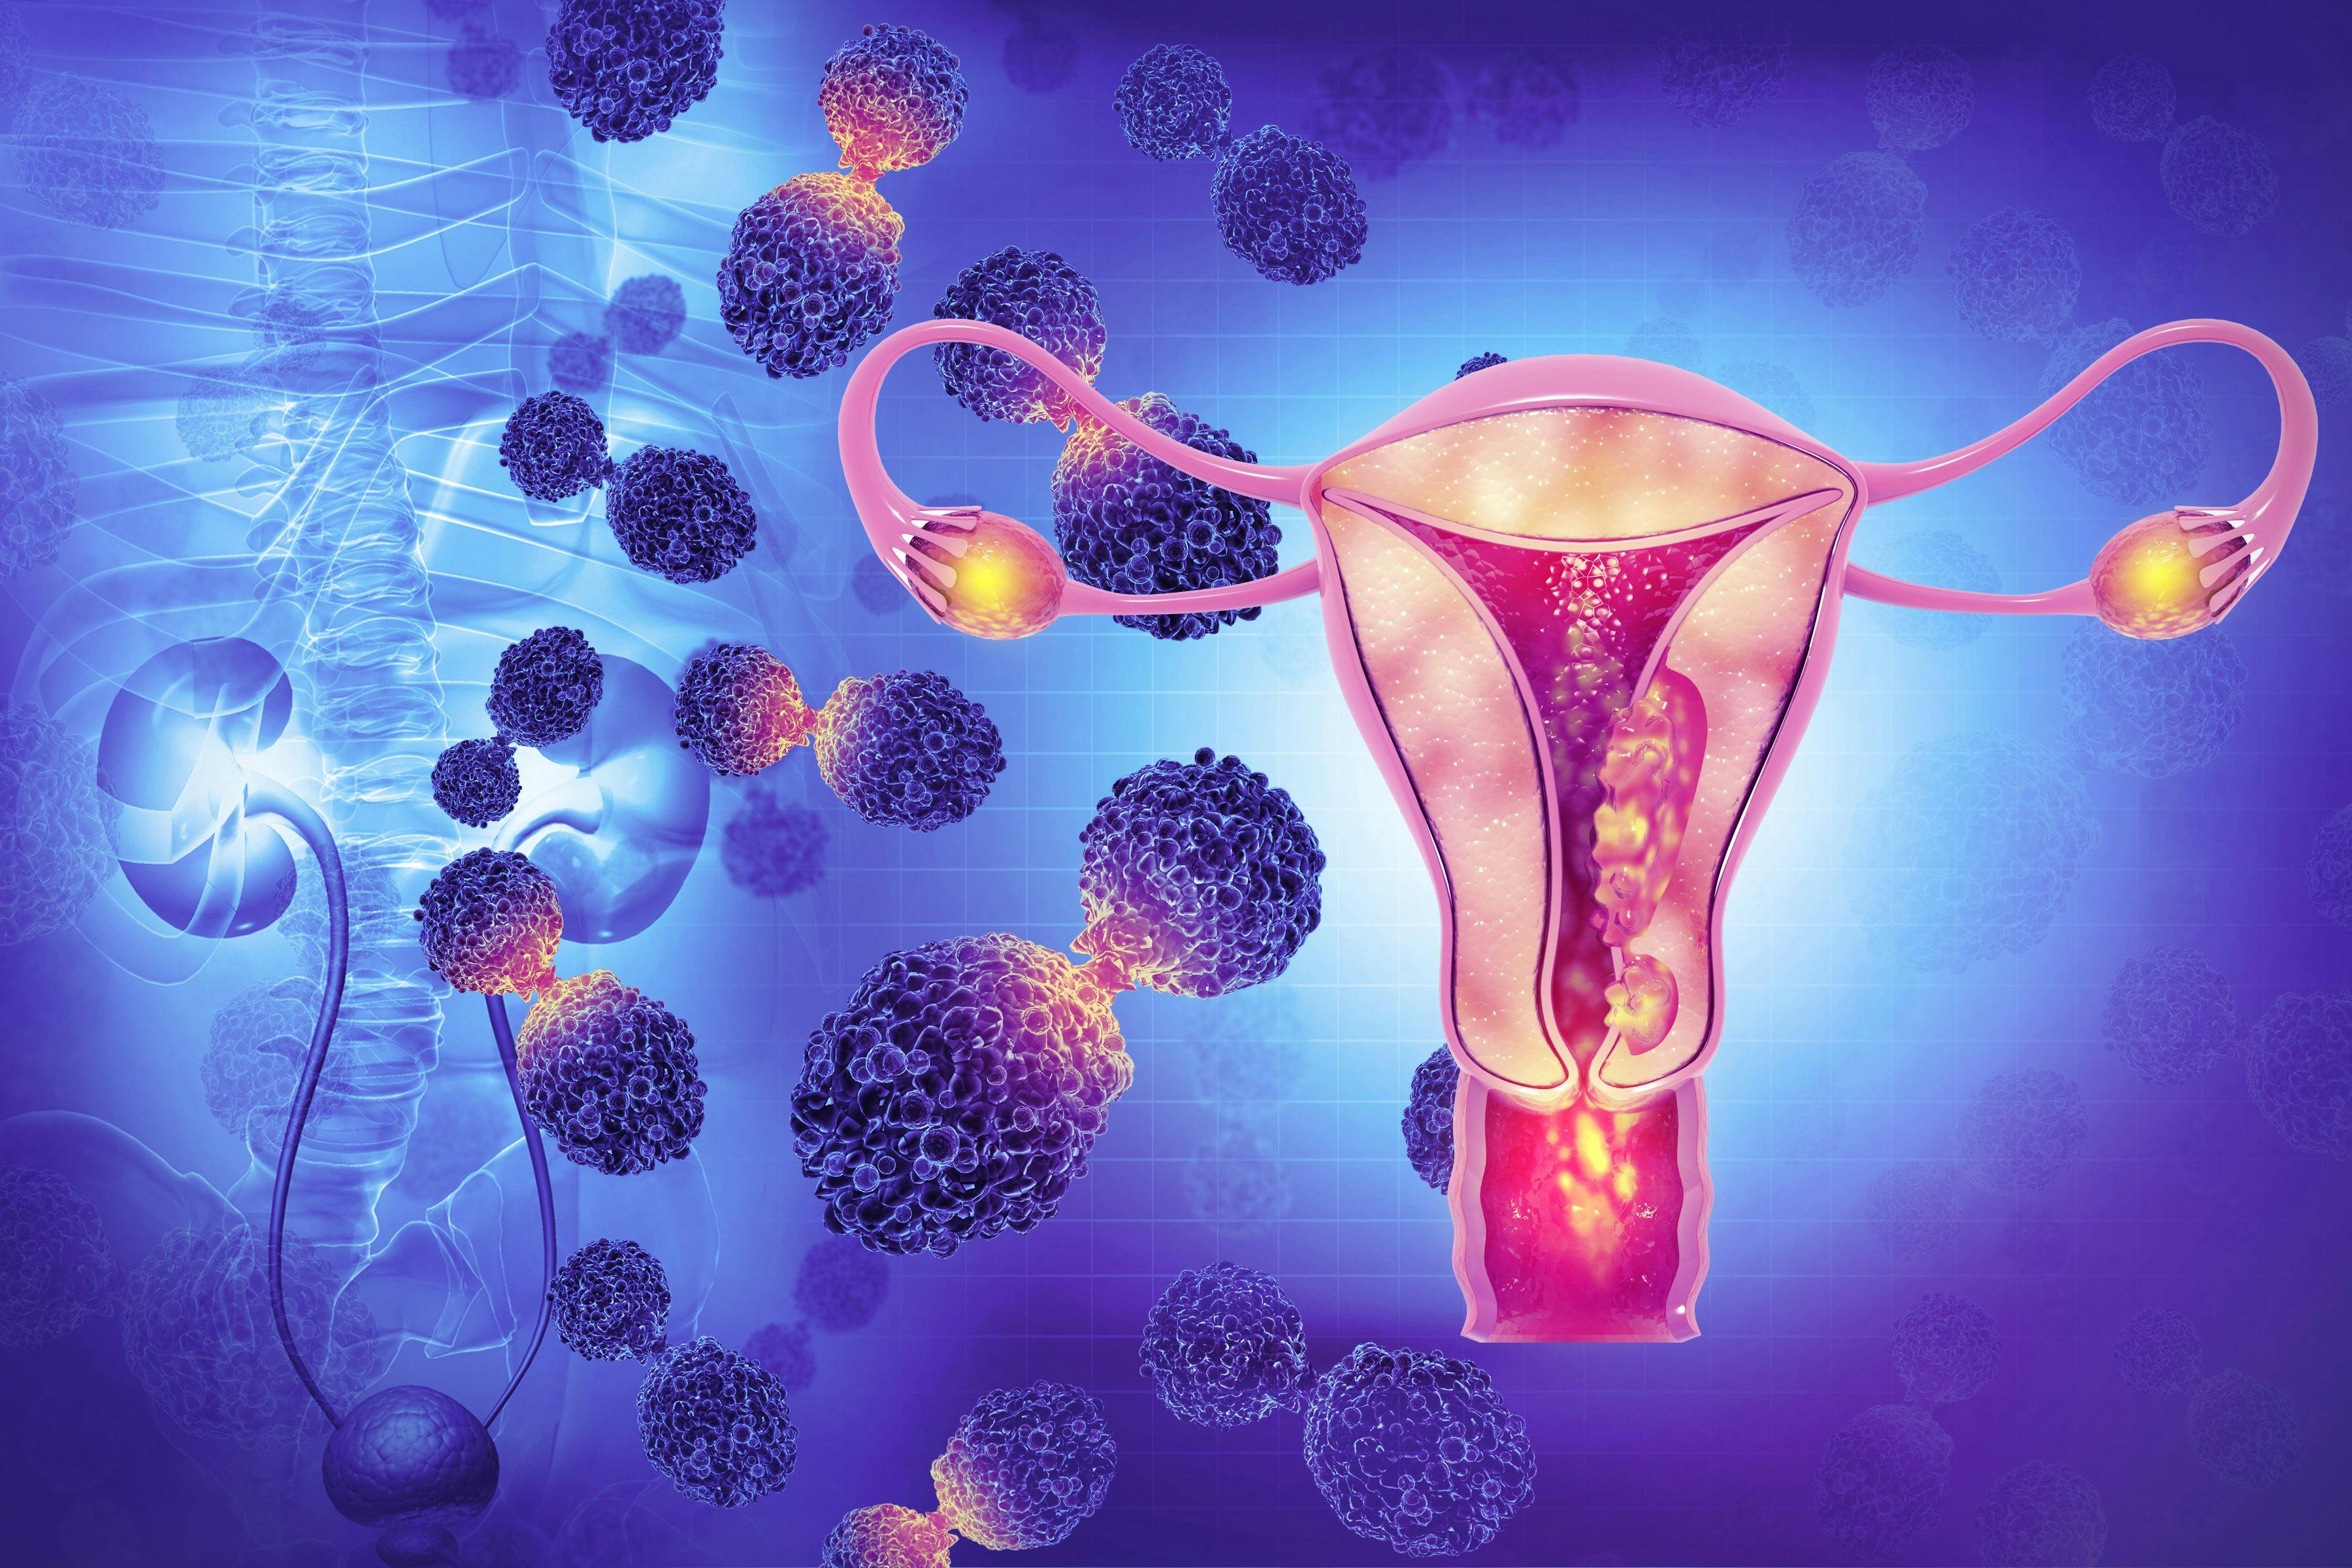 Female reproductive system diseases. Uterus cancer and endometrial malignant tumor as a uterine medical concept. 3d illustration | Image Credit: Crystal light - www.stock.adobe.com